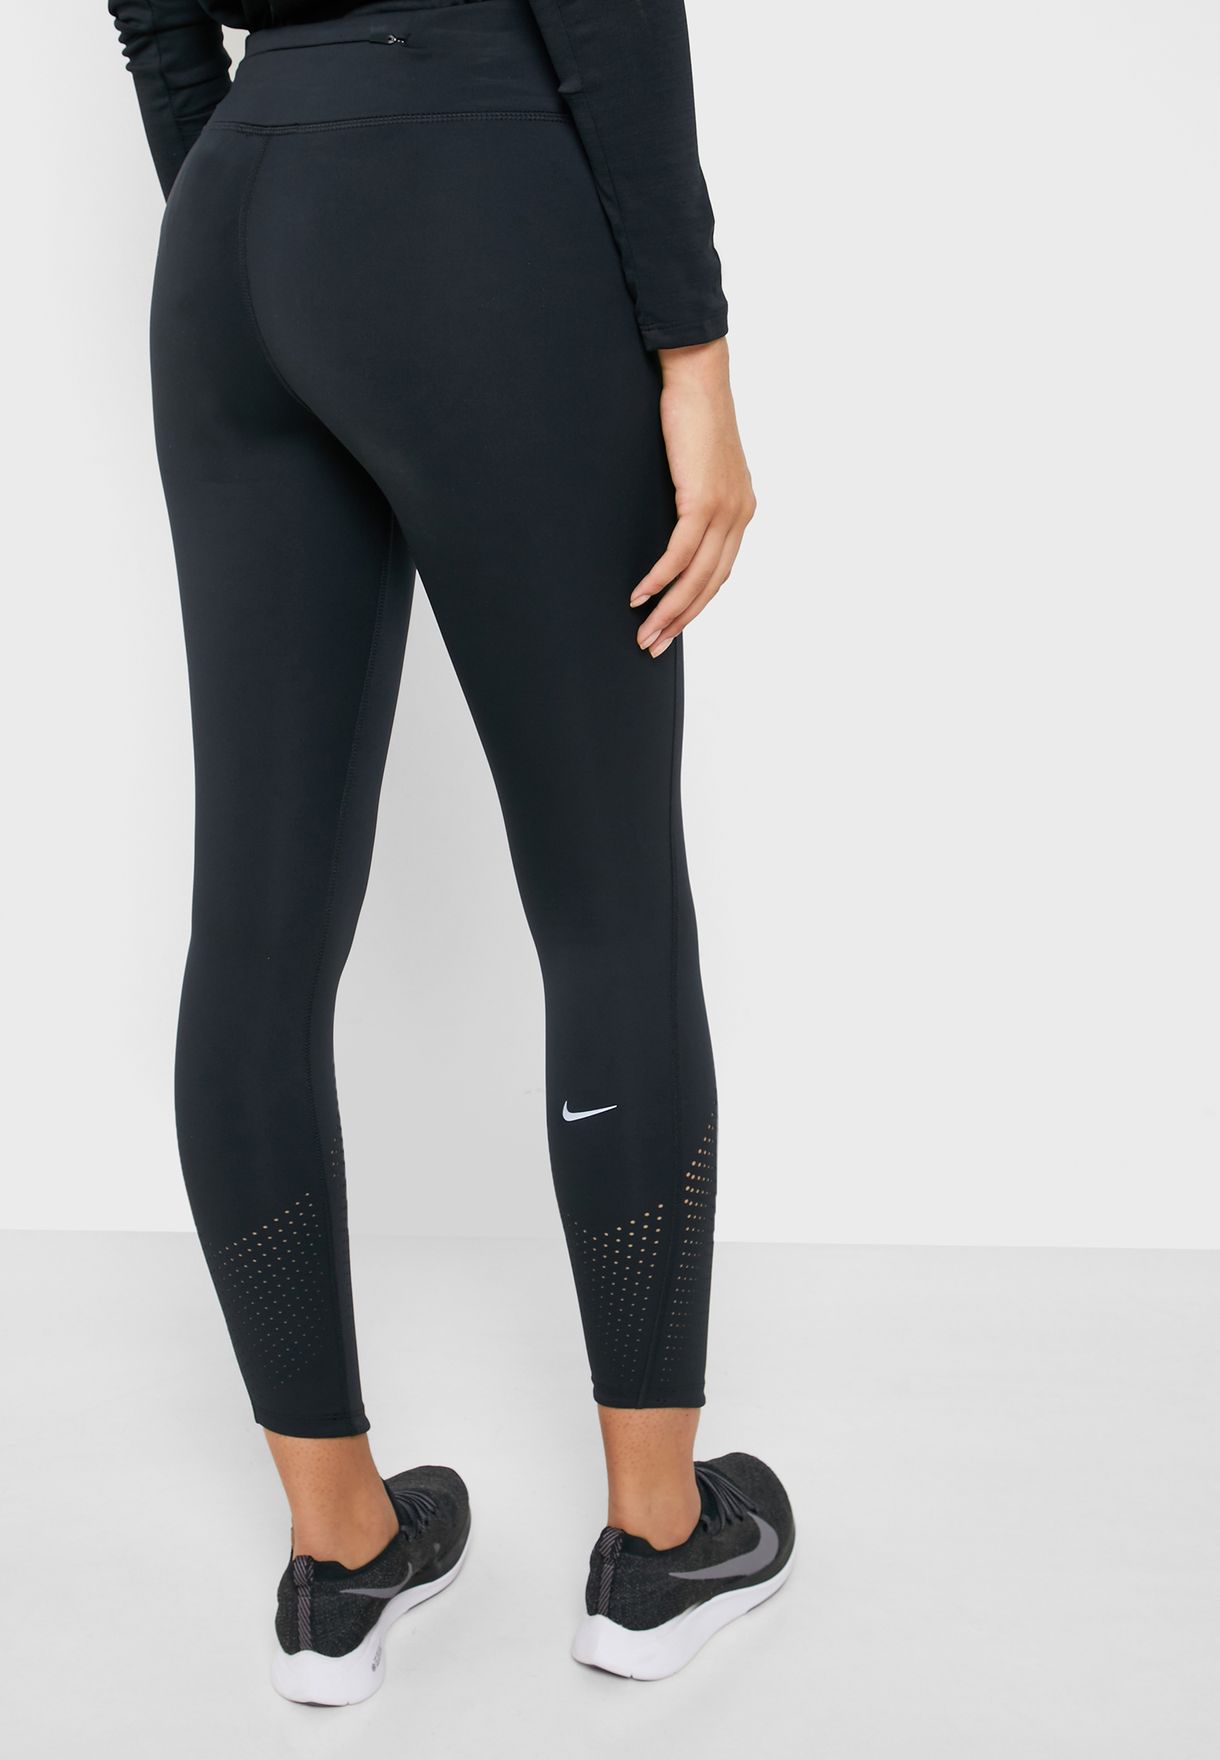 nike epic lux tights review